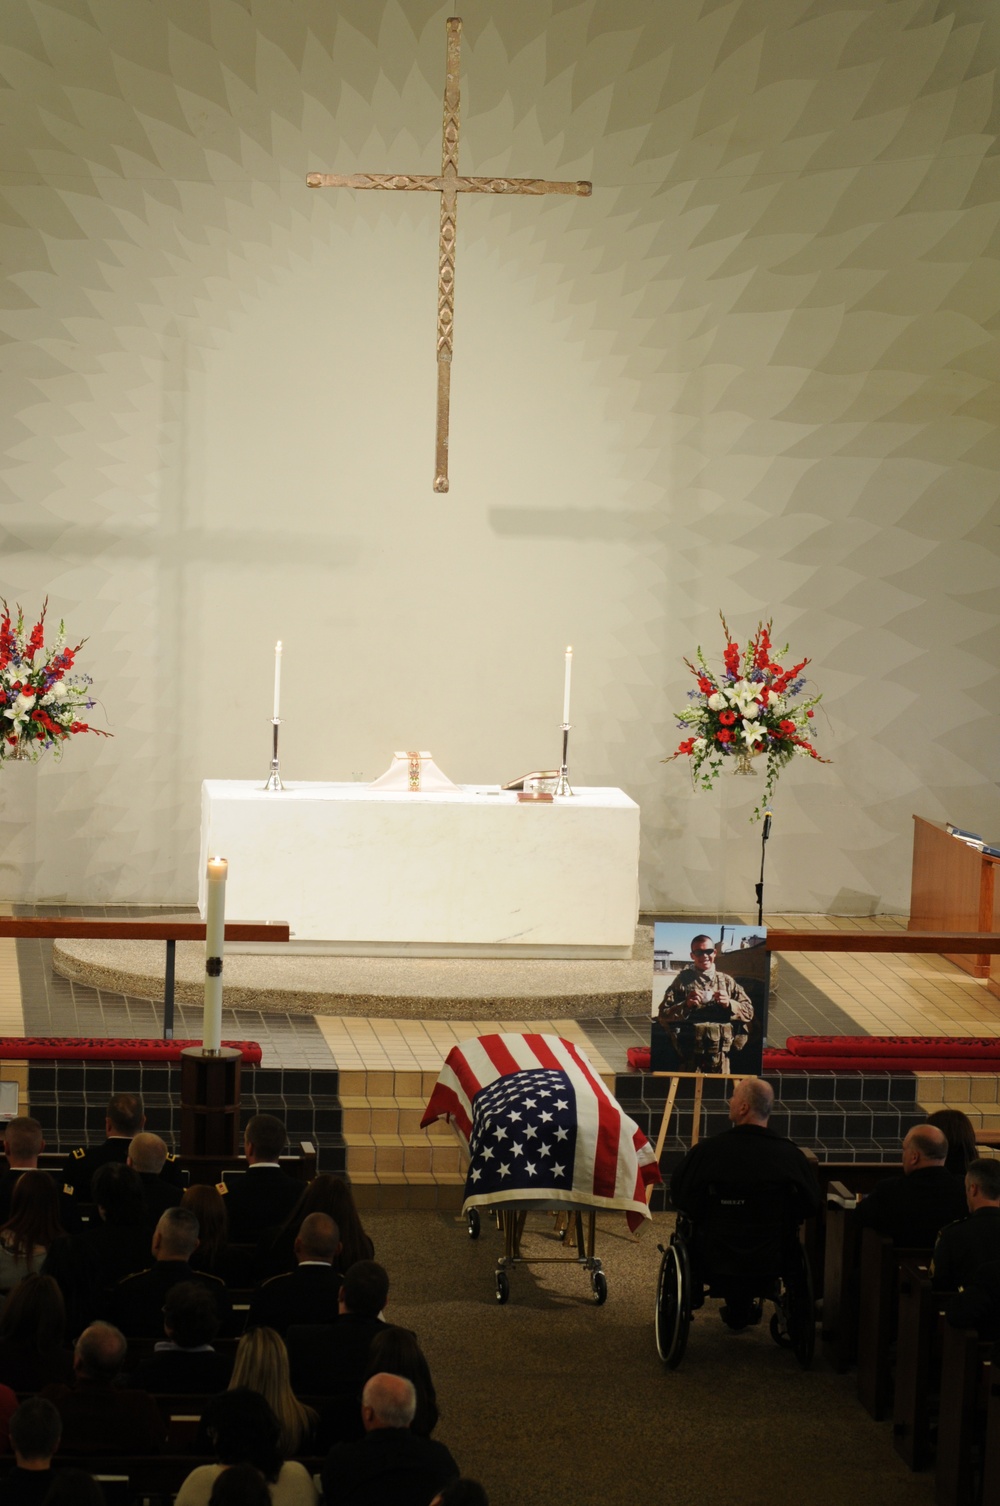 California Army National Guard soldier rests eternally